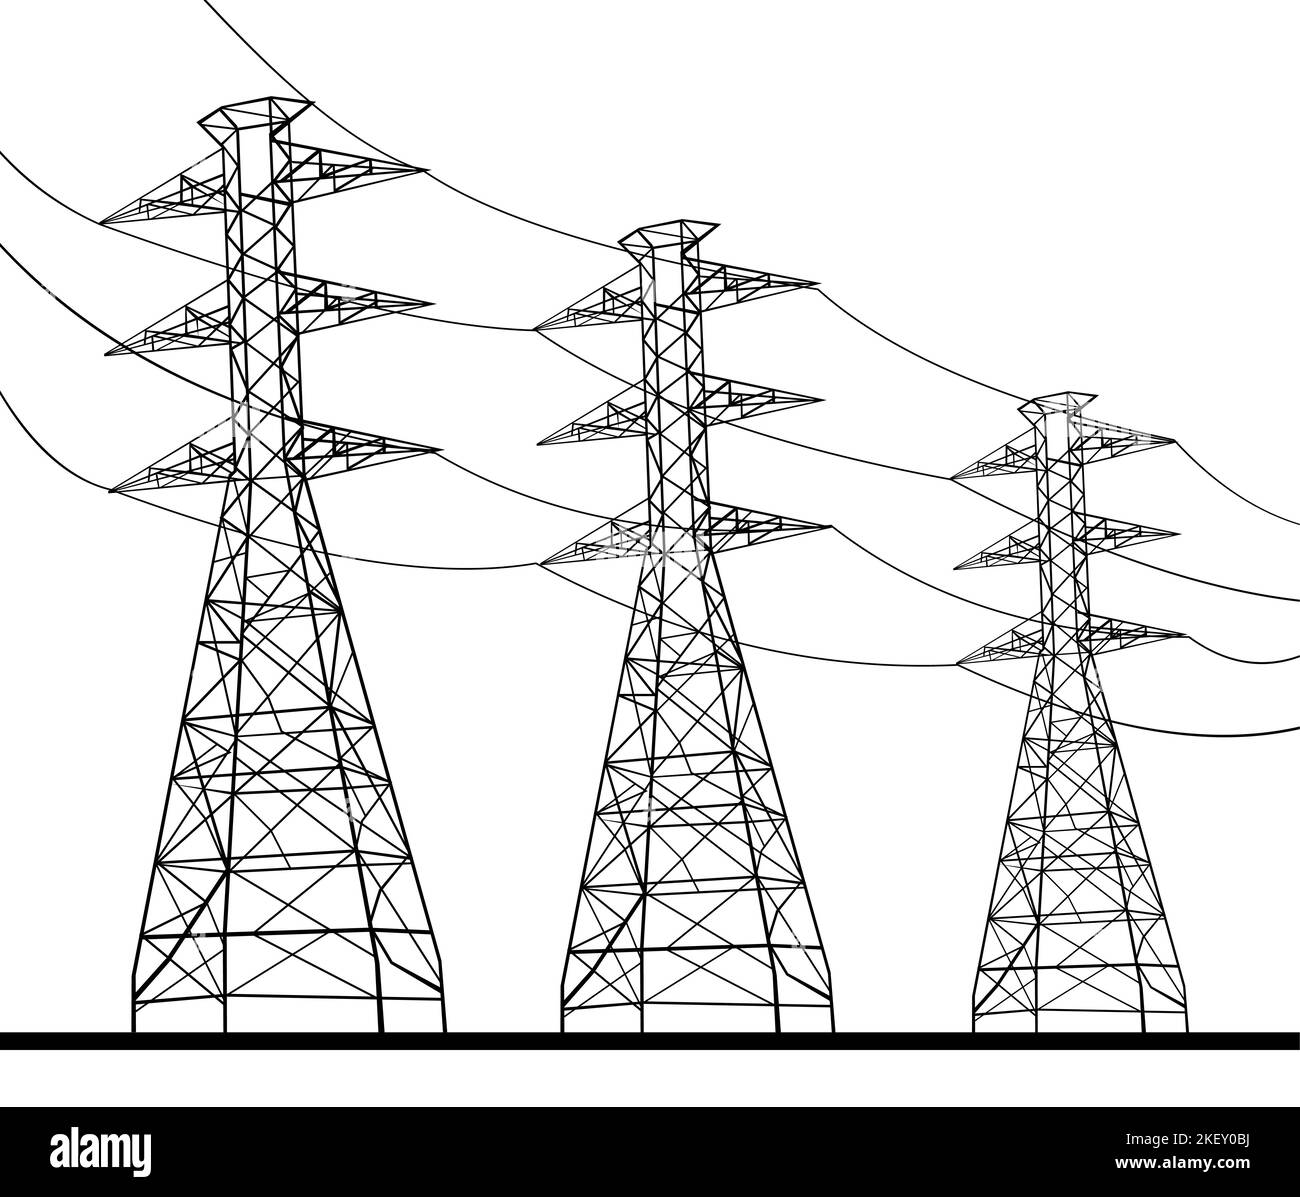 Line Drawing illustration of transmission tower or power line electricity pylons on isolated background done in black and white. Stock Photo